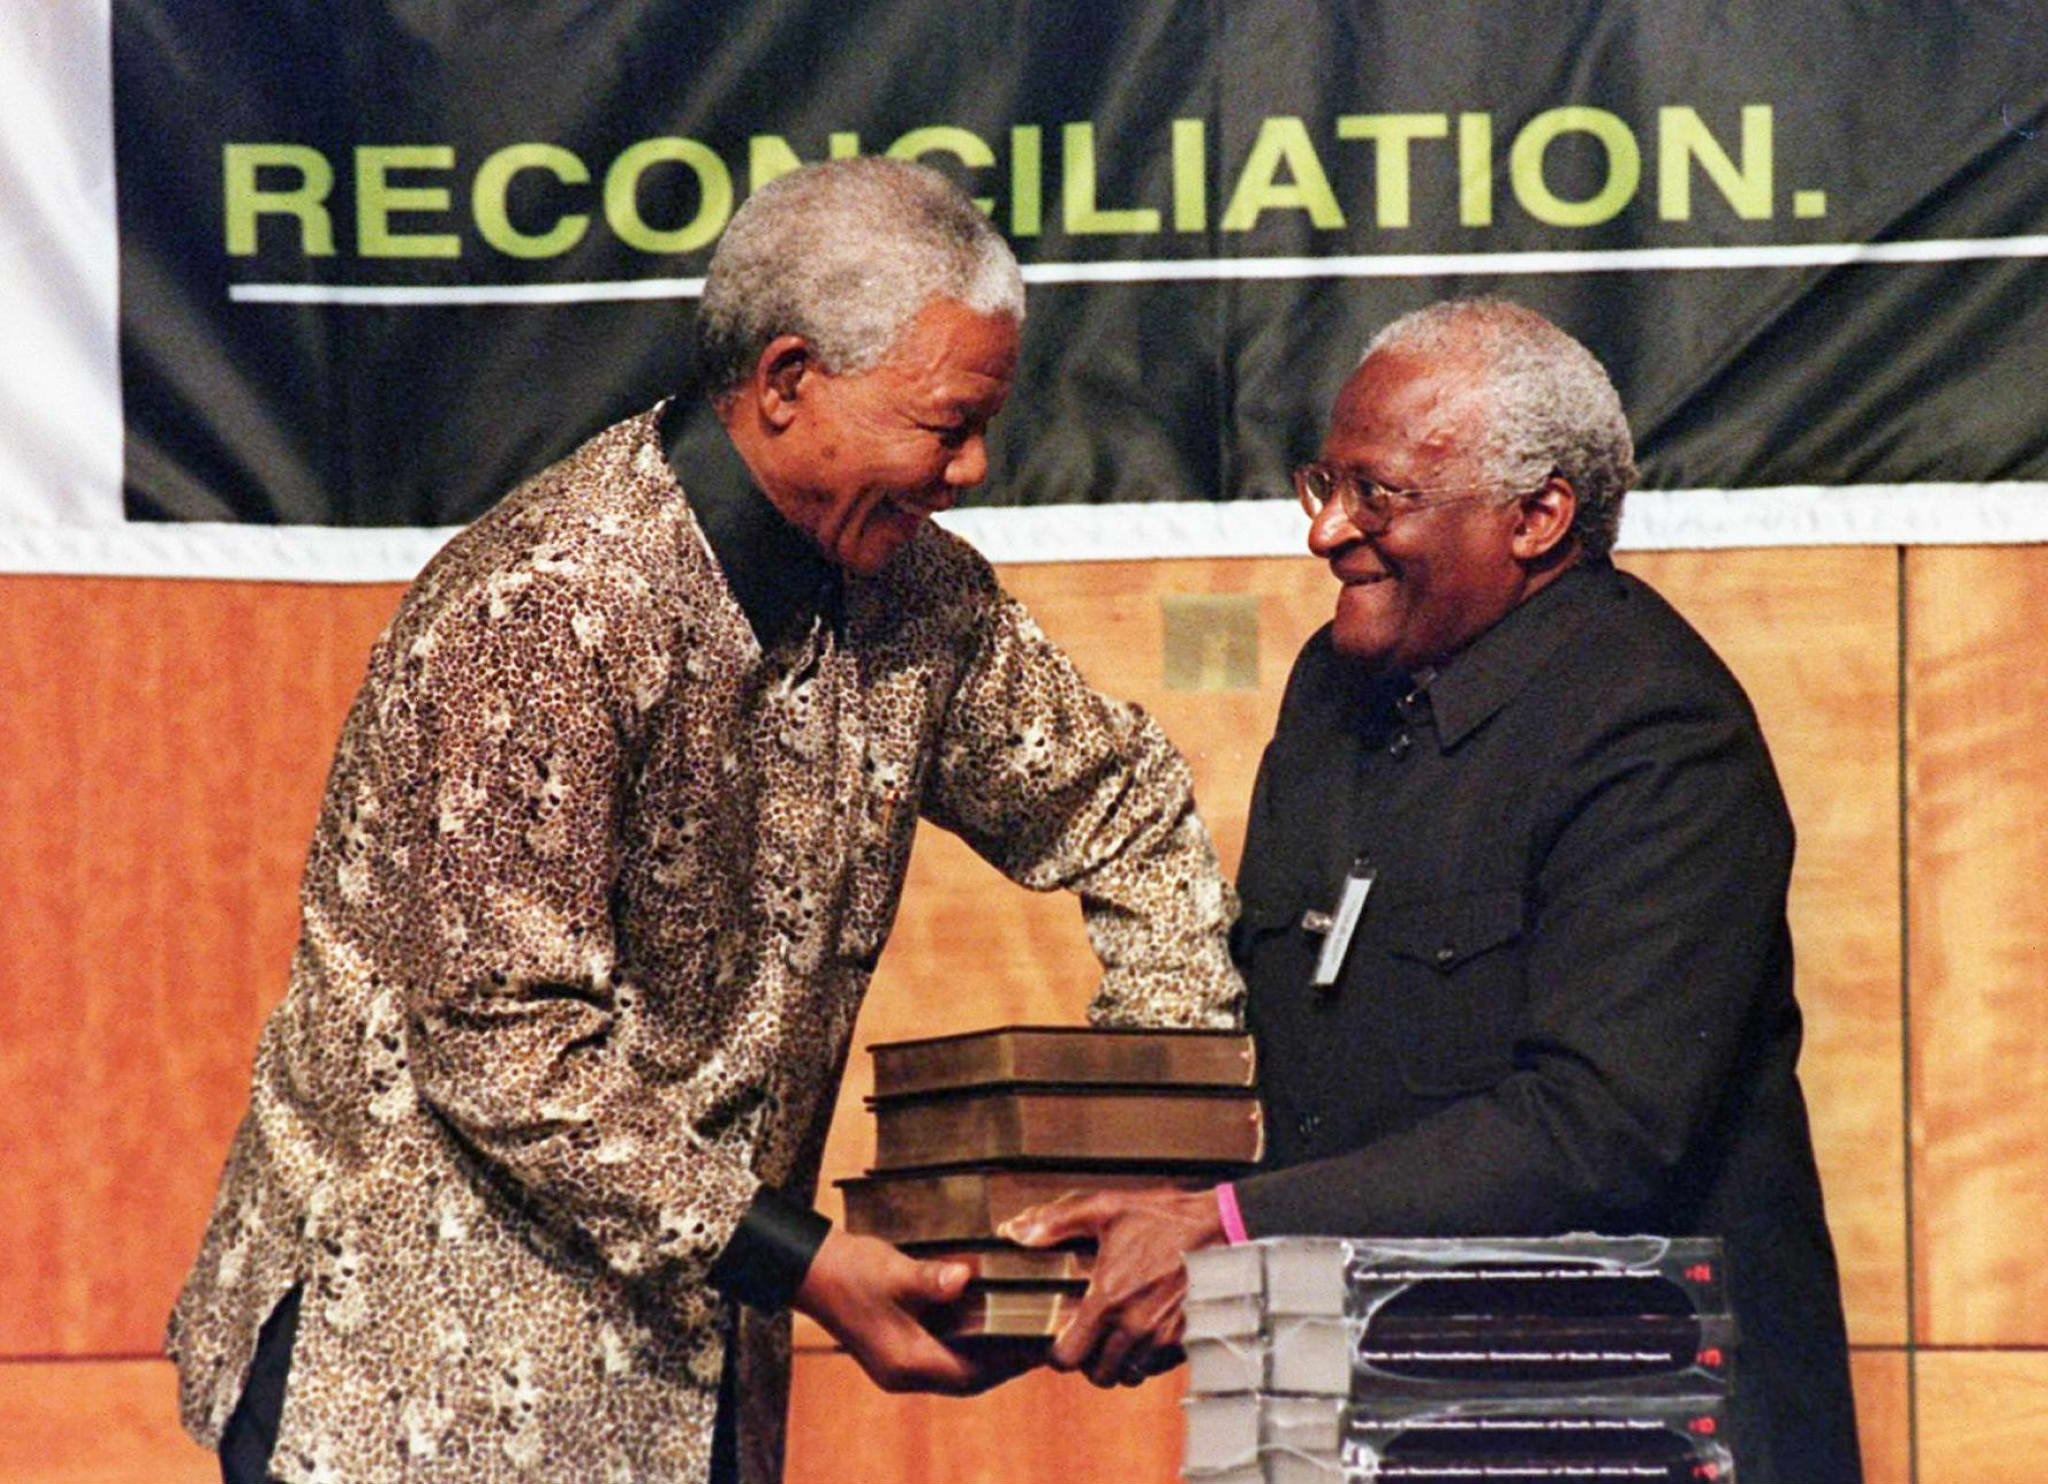 Desmond Tutu's truth commission opted for 'restorative' justice